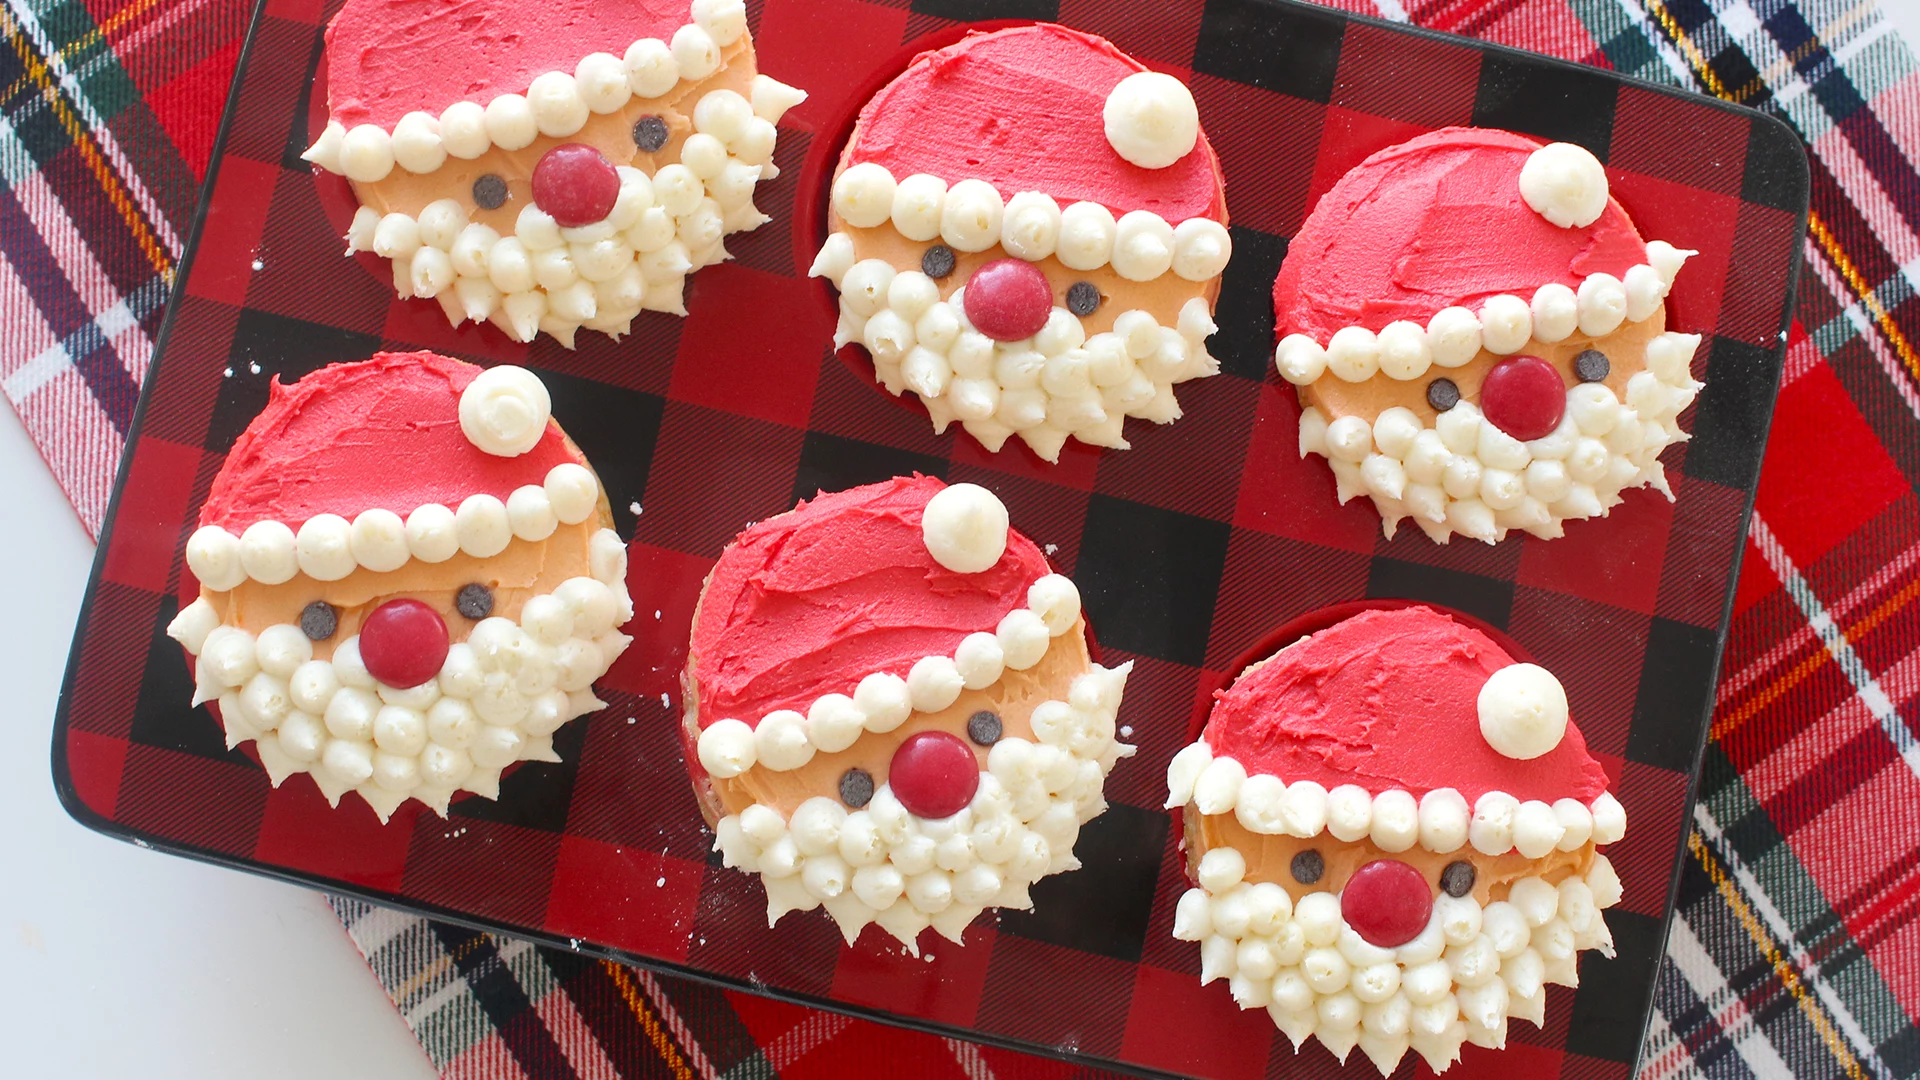 six cupcakes on red and black checkered muffin mould, decorated with red white and orange frosting, made to look like santa, red candies for noses